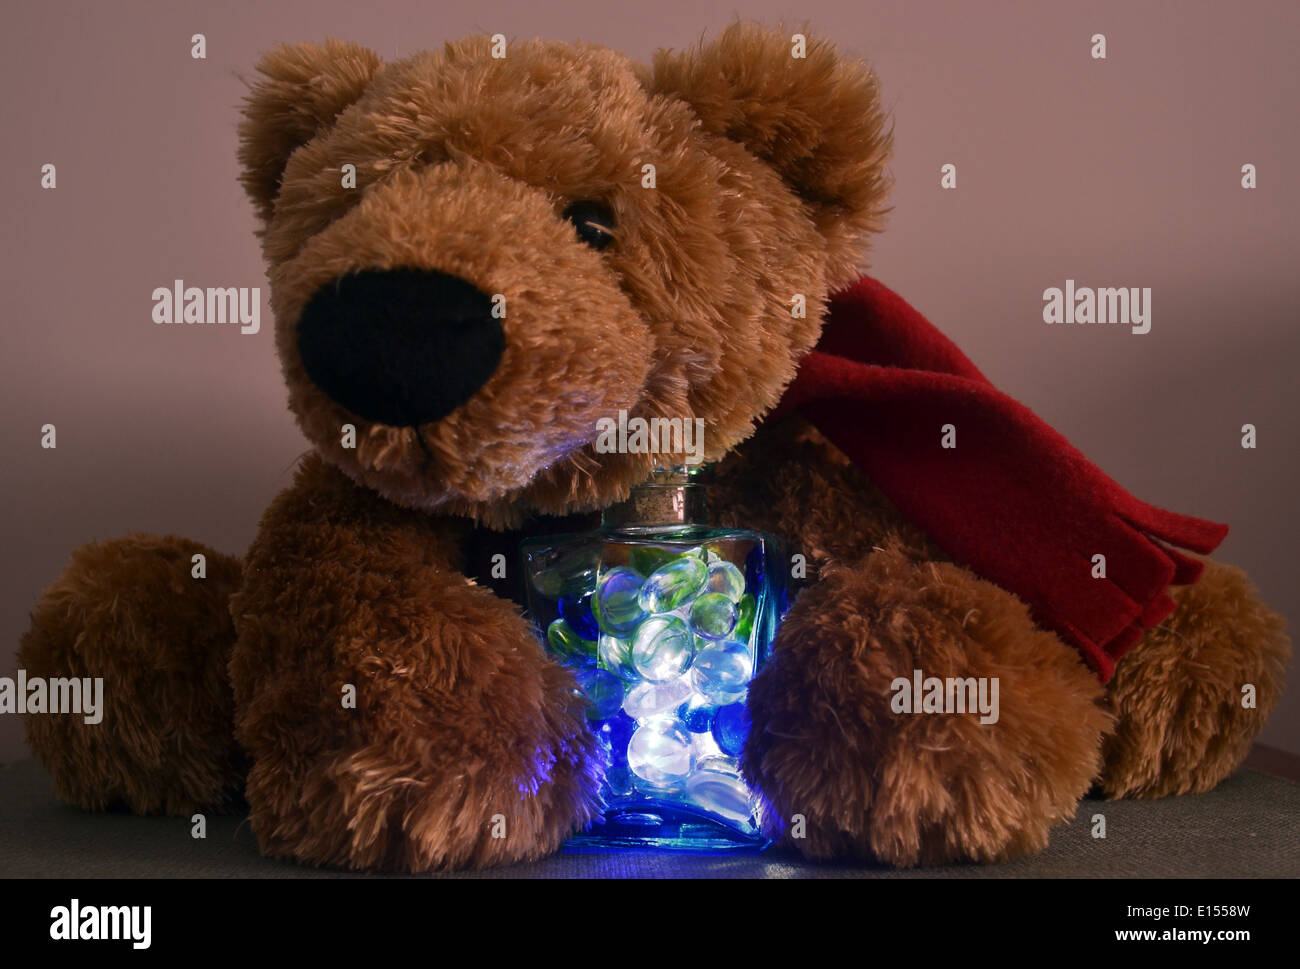 teddy bear and candle Stock Photo - Alamy